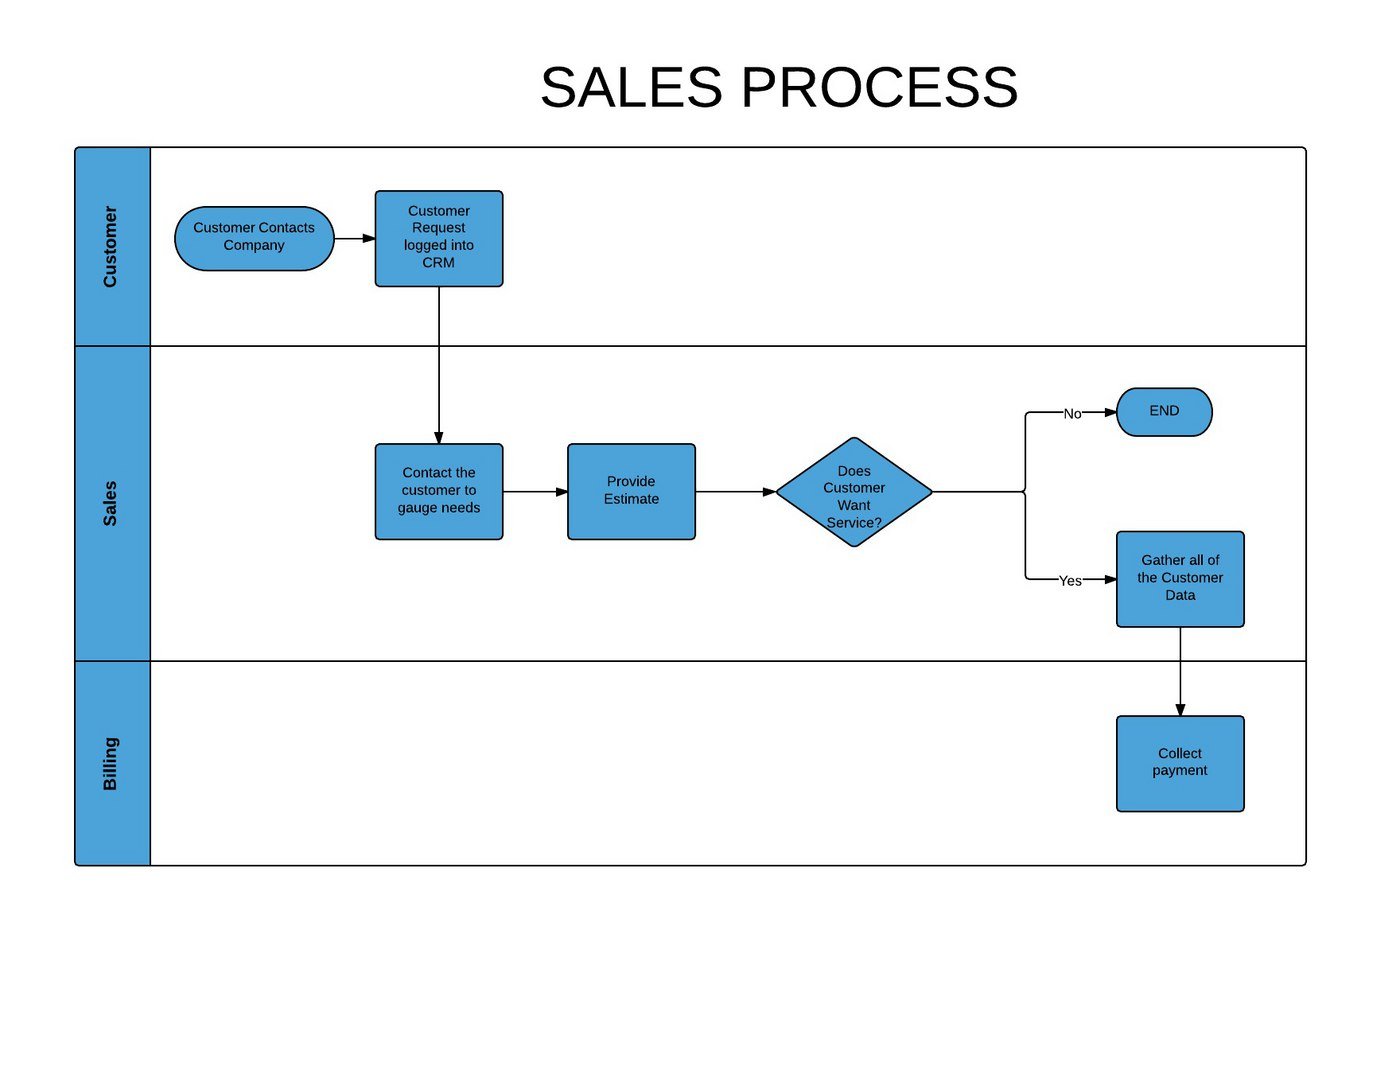 Add a Flowchart Graphic to Improve Readability